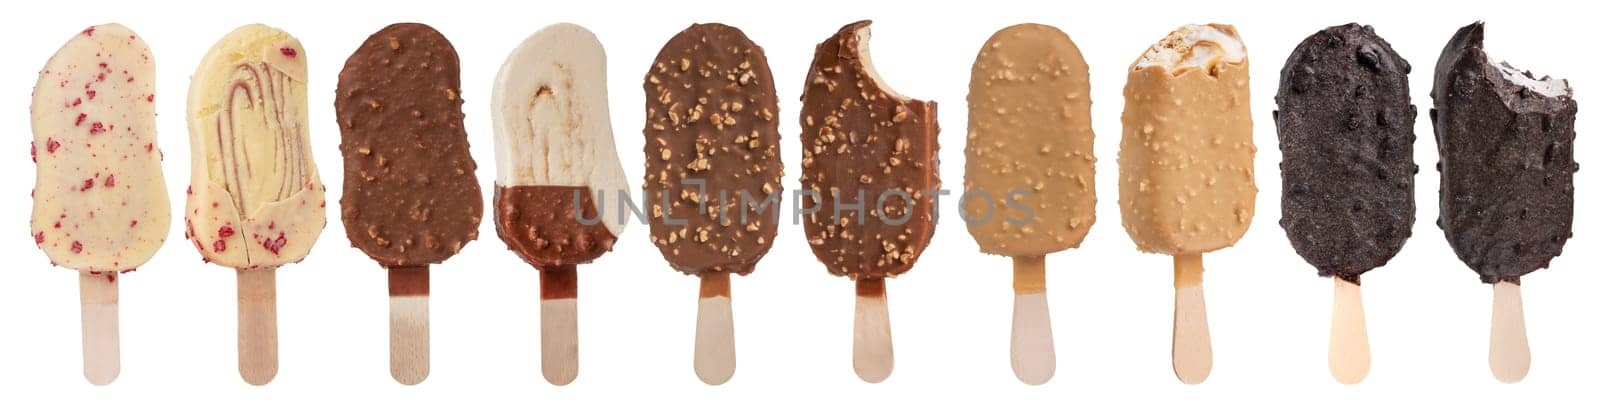 Chocolate ice creams with icing of different colors. A set of ice cream of different types, flavors on a white isolated background. by SERSOL